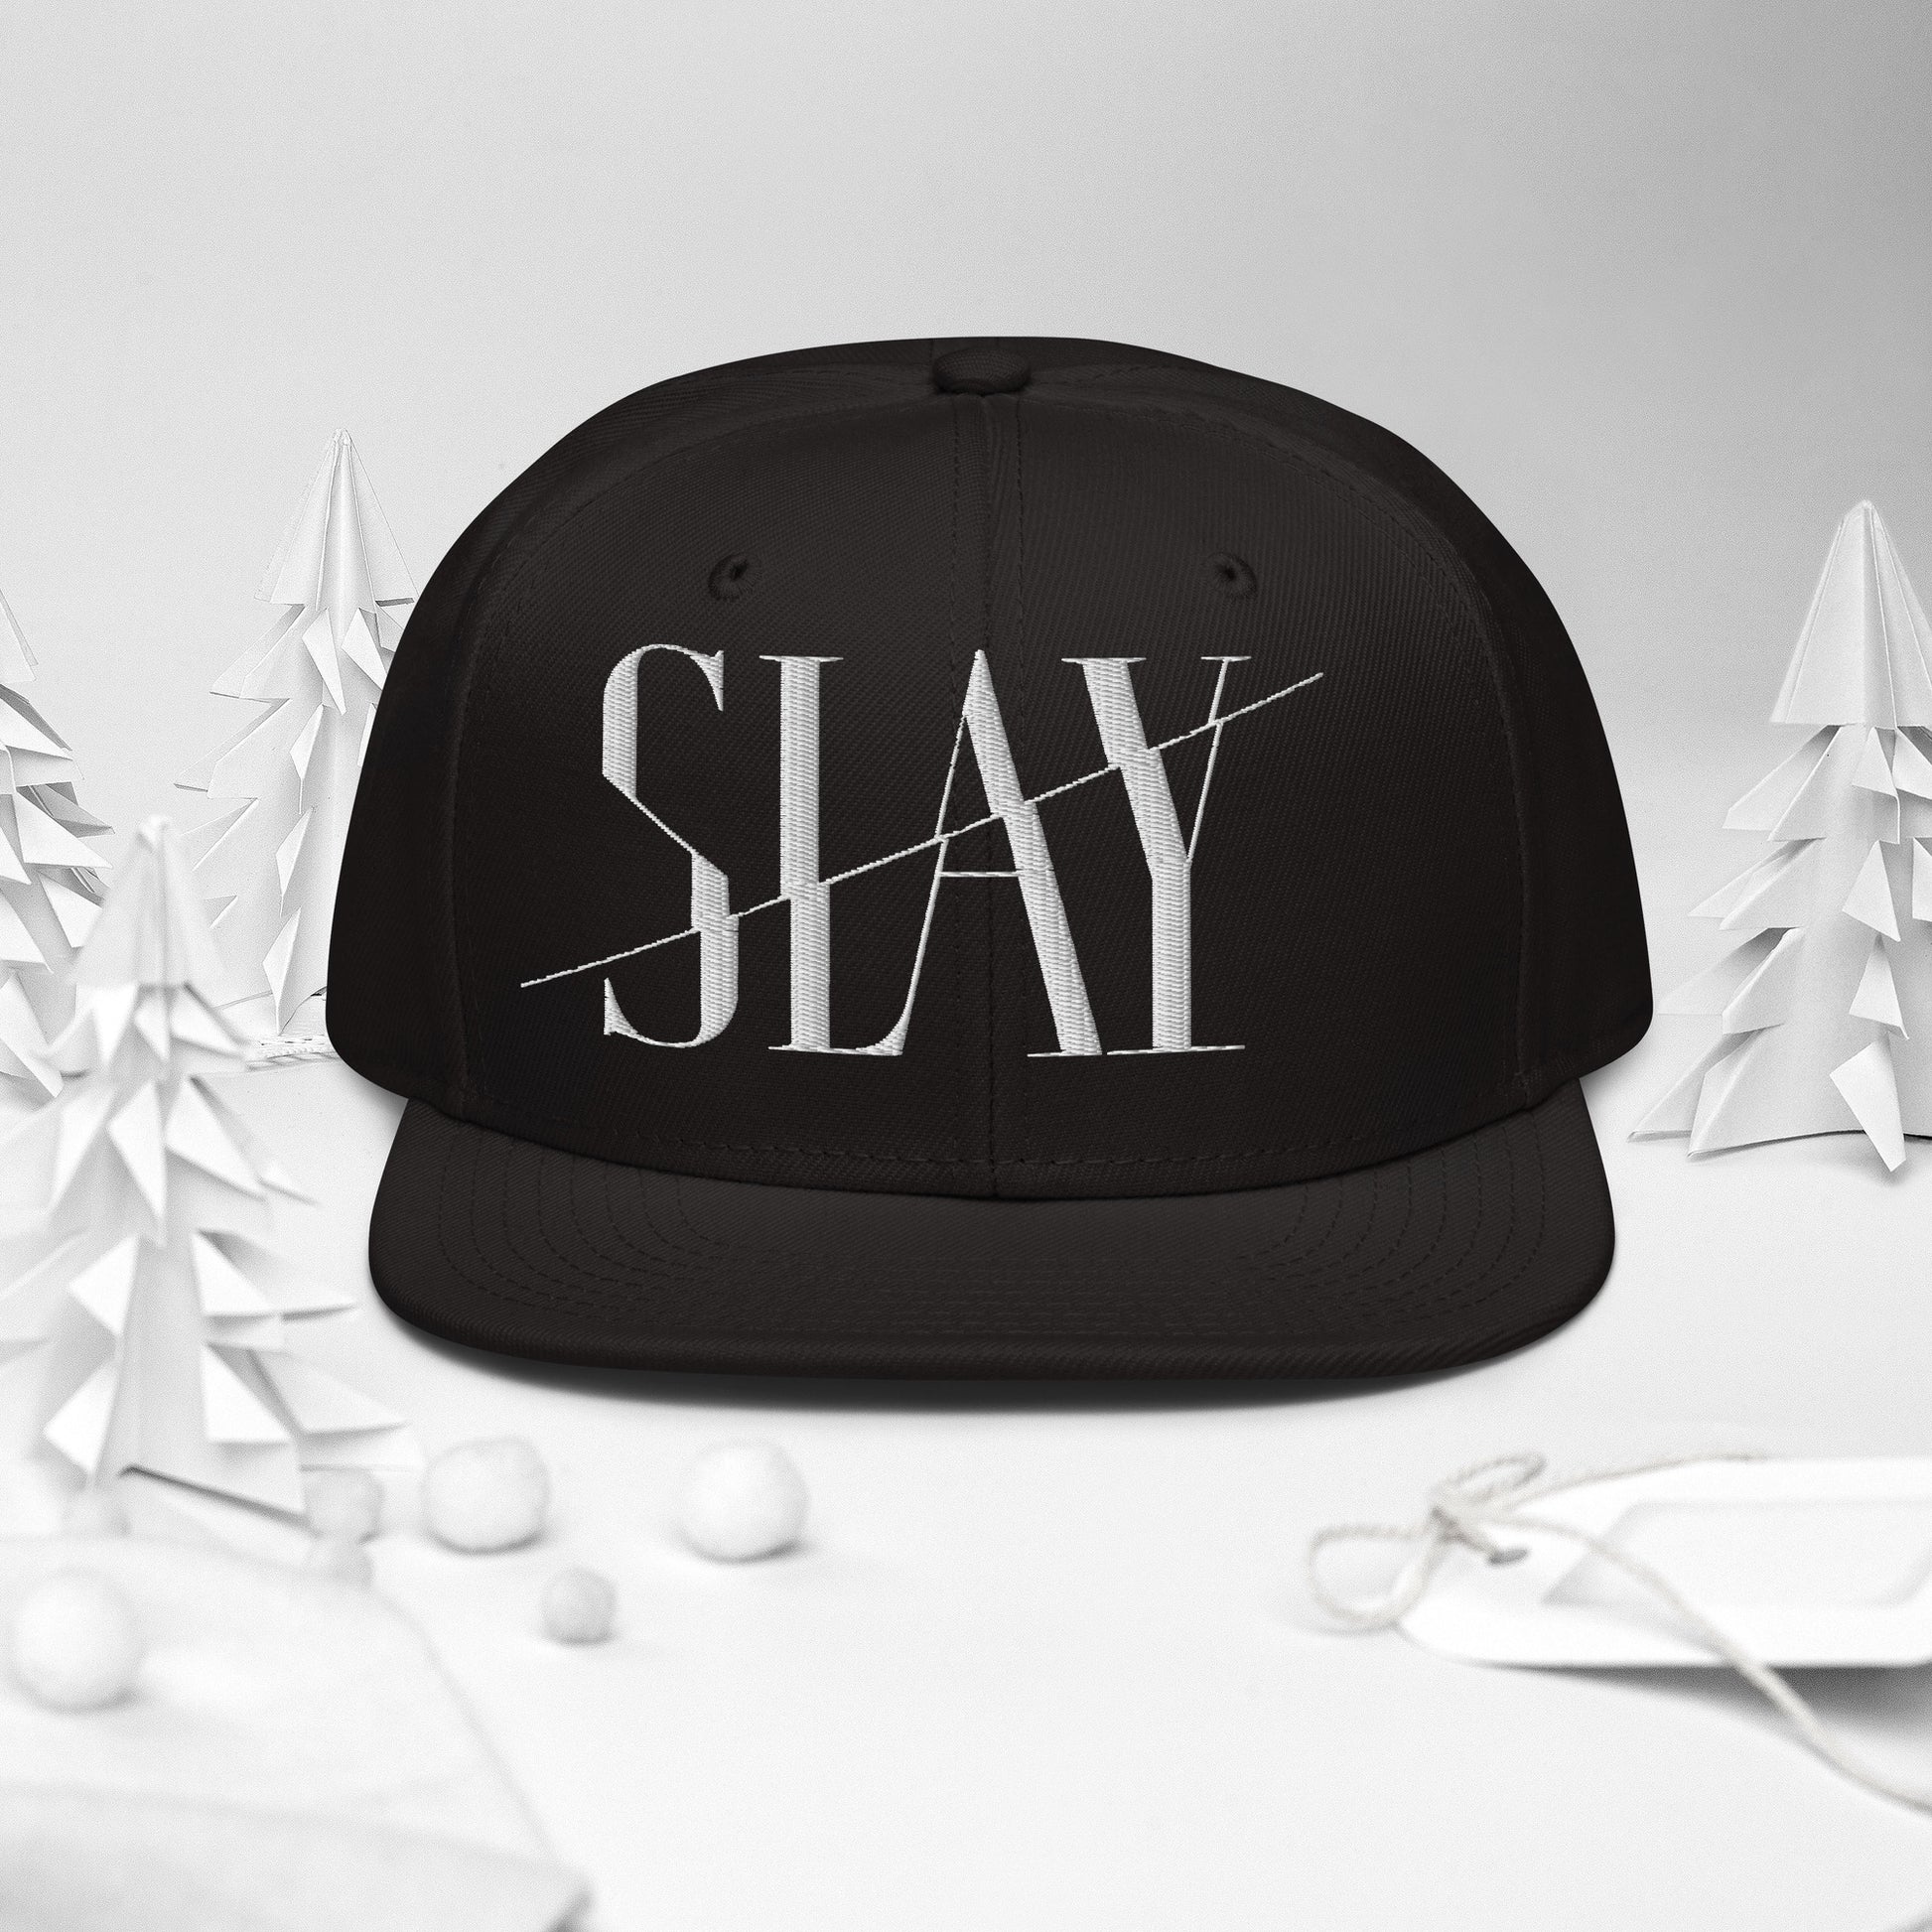 A black Snapback Hat with the word "SLAY" embroidered on the front.